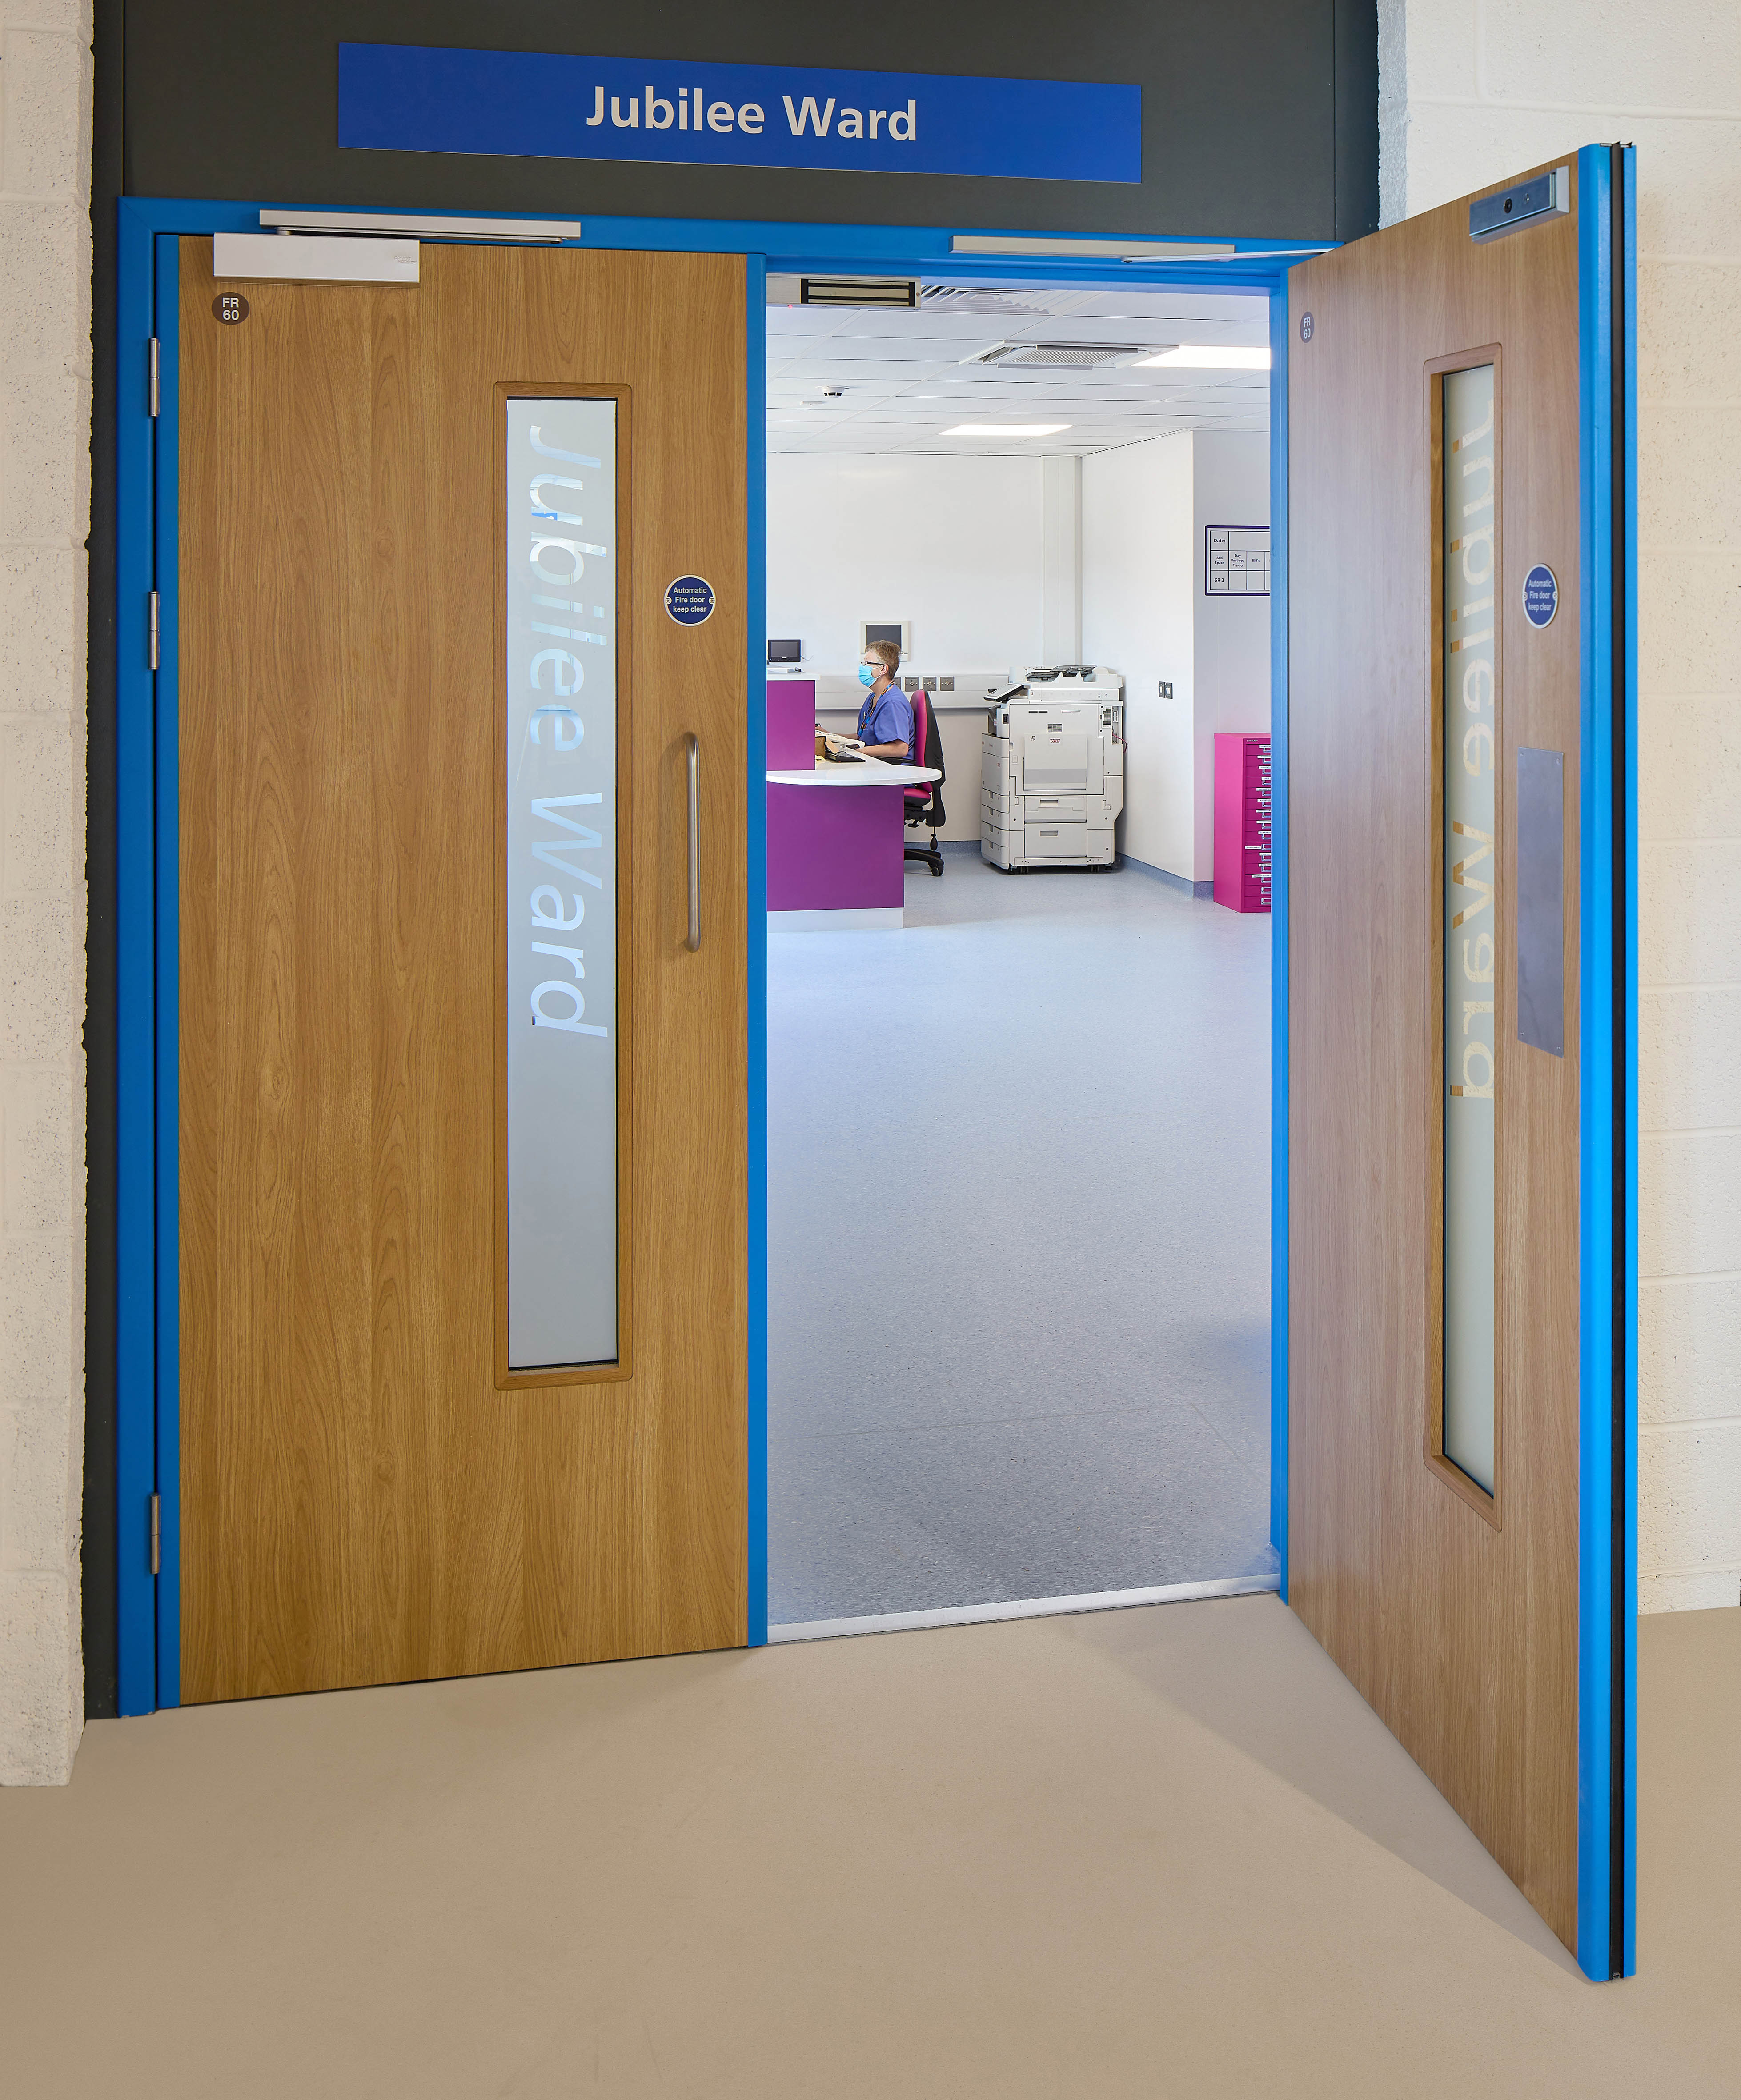 The Jubilee Wing was commissioned to address a backlog of patients waiting for orthopaedic surgery